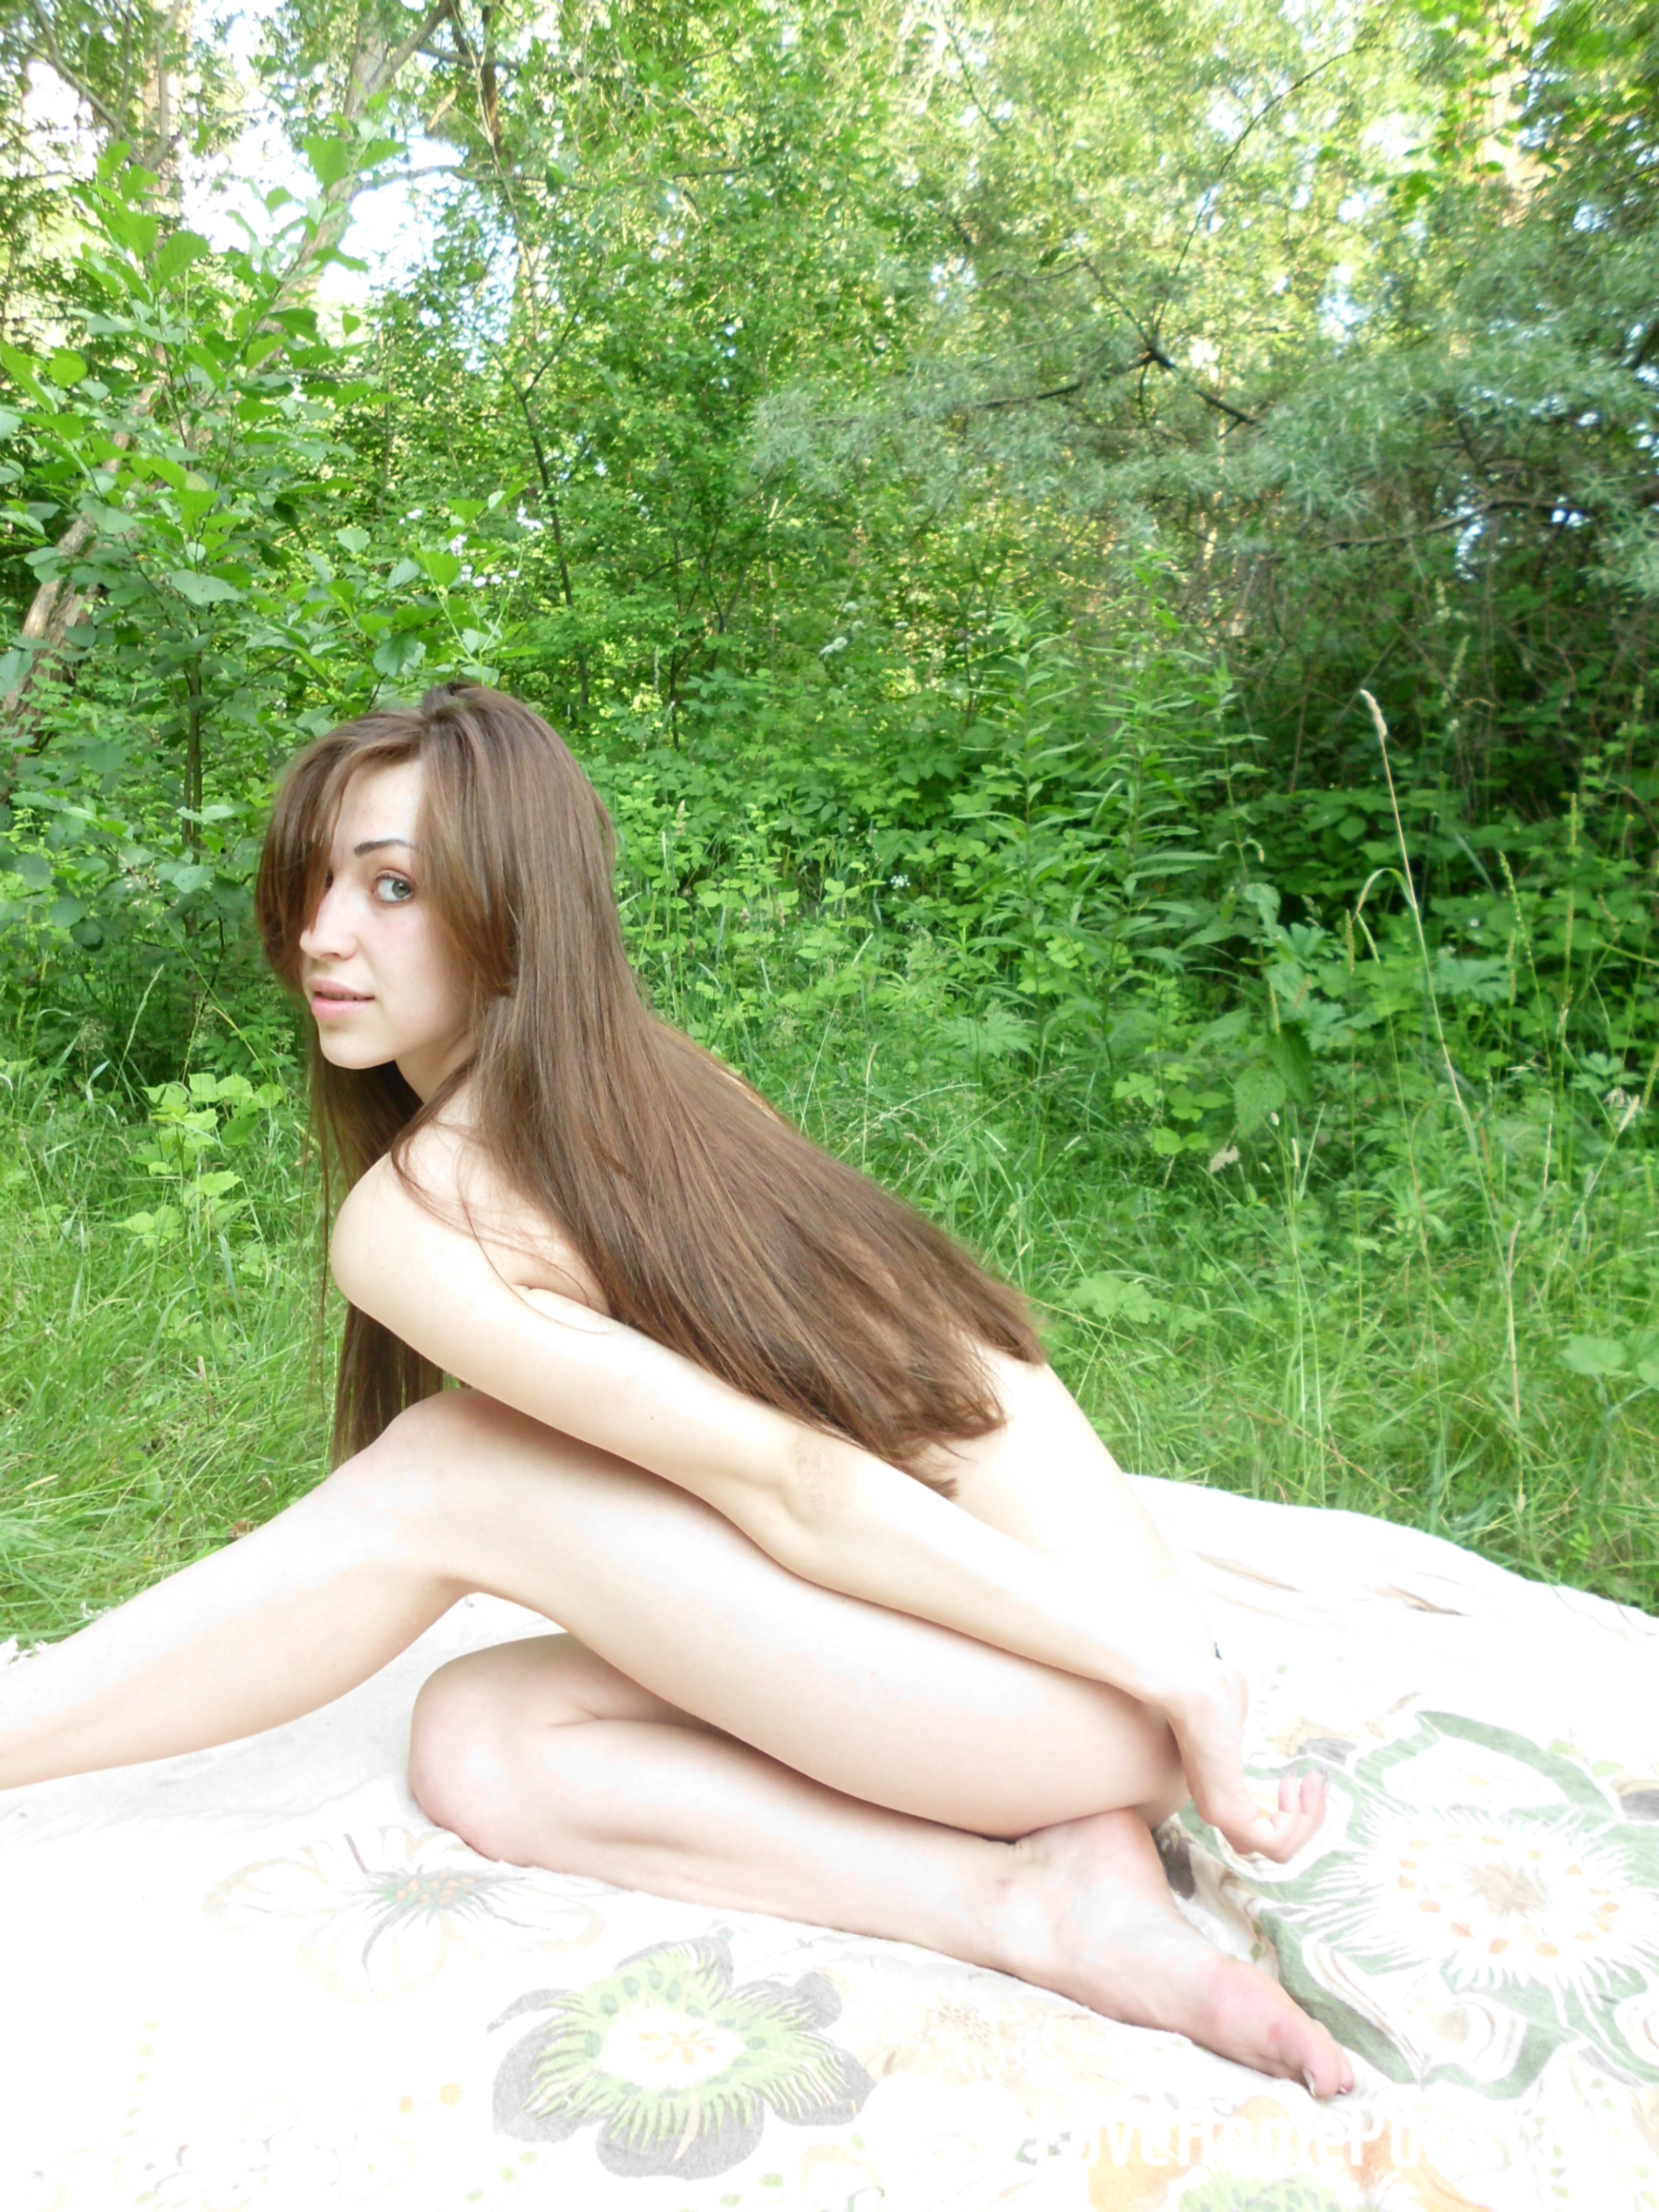 Beauty with long legs on a picnic